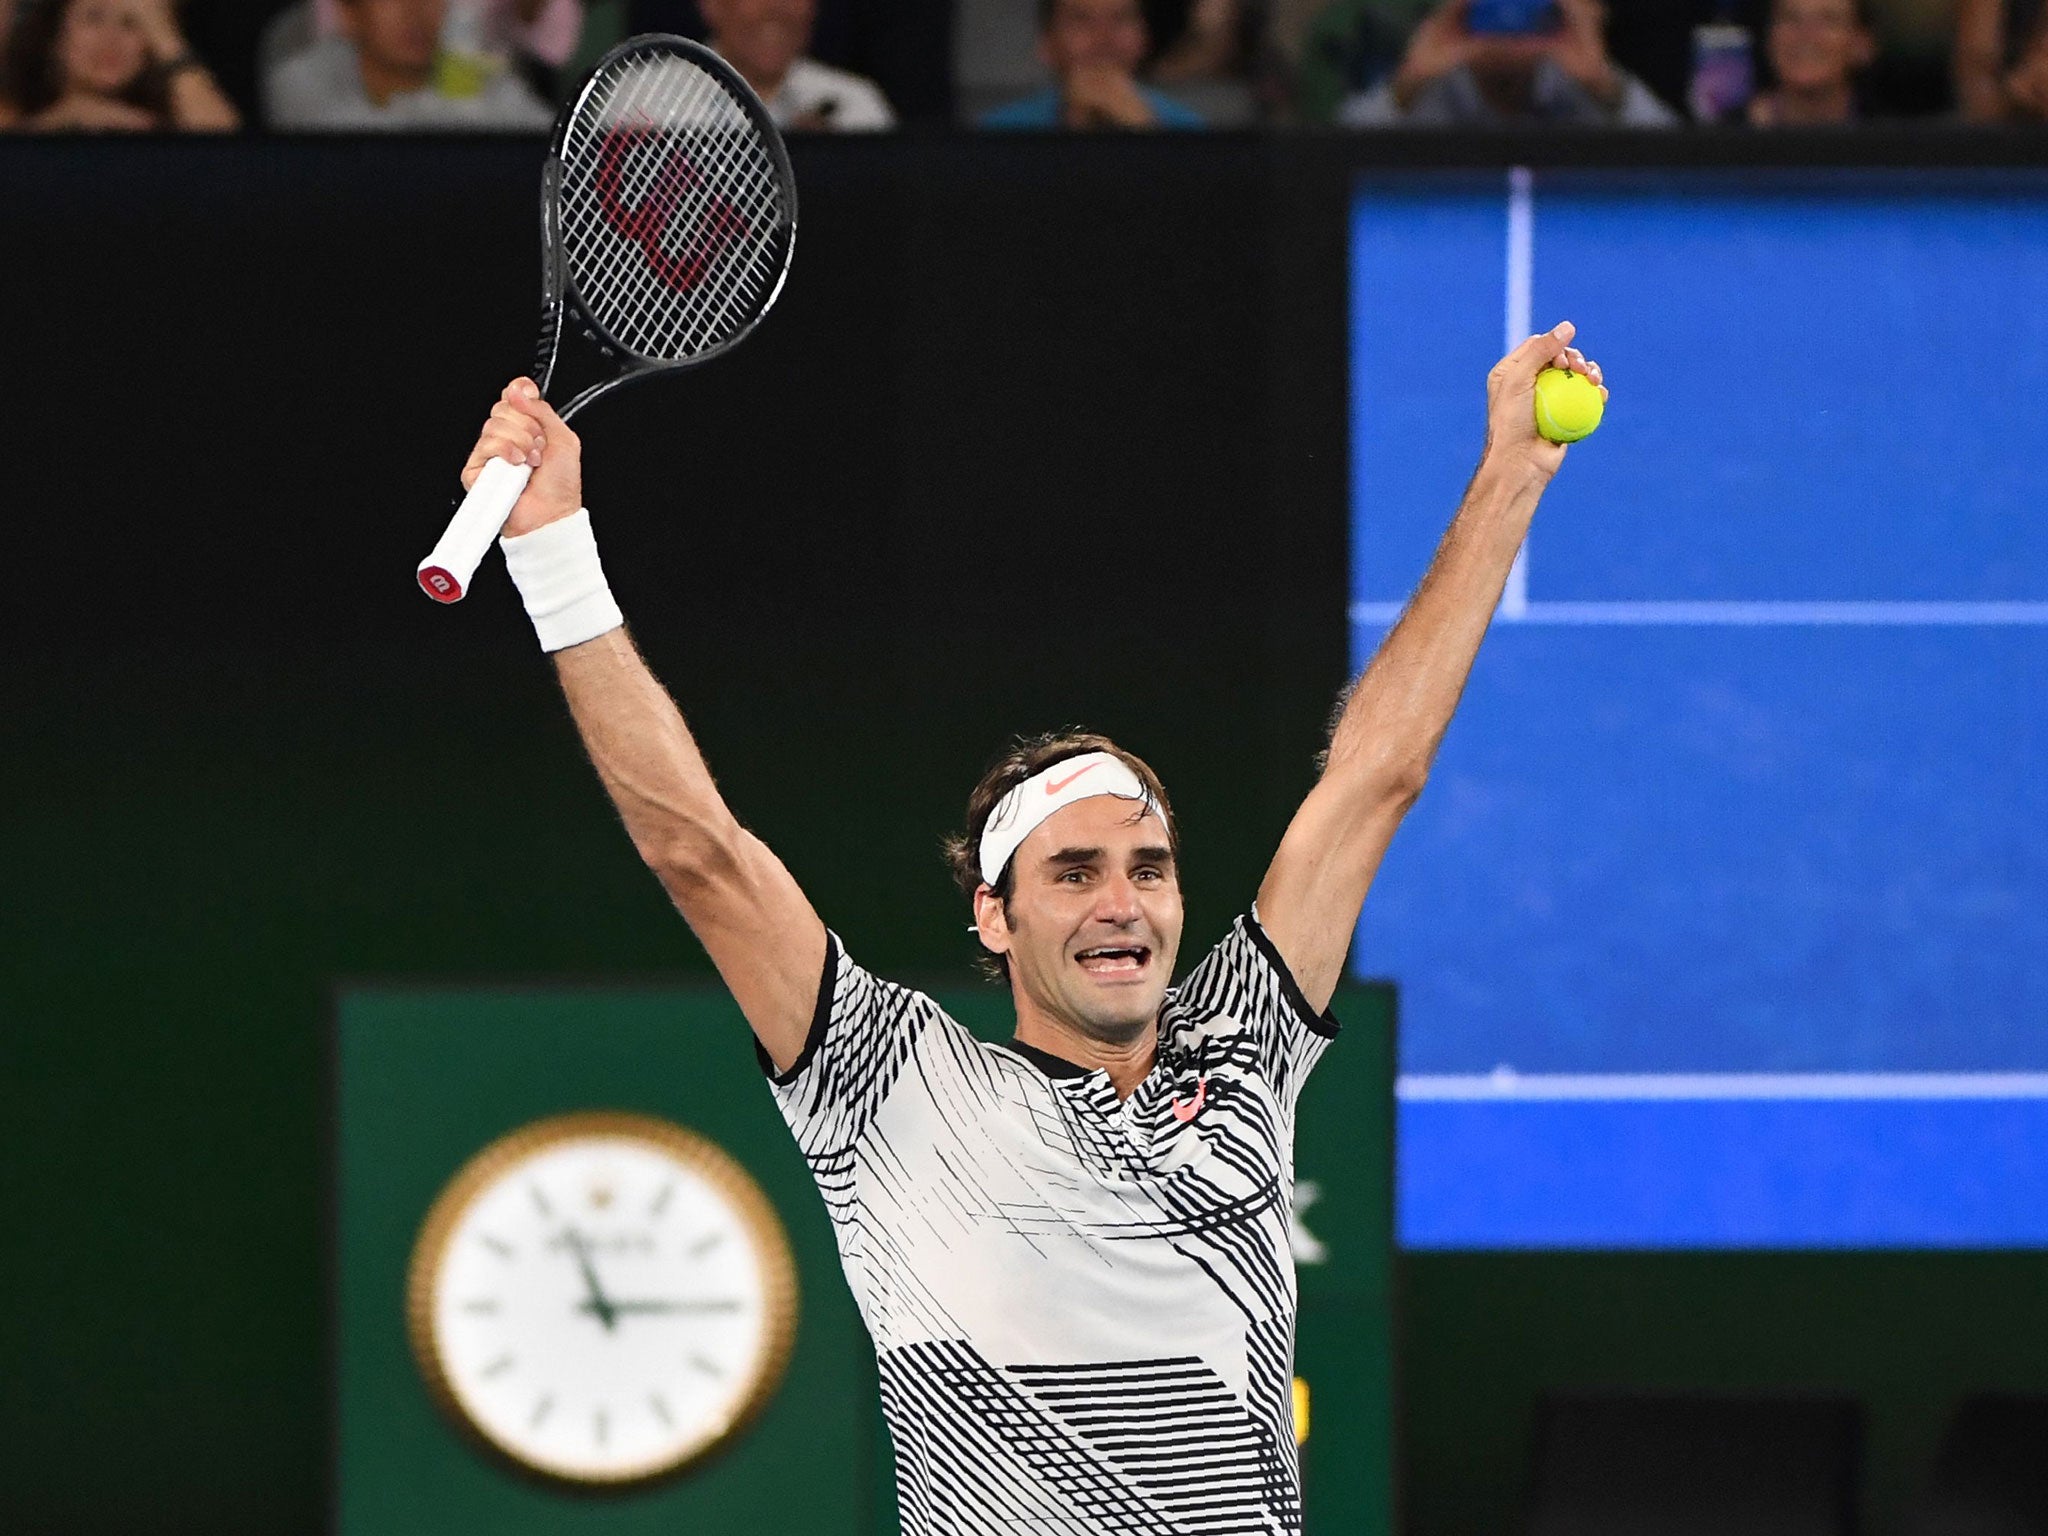 Quizás ley Alargar Roger Federer beats Rafael Nadal in five-set thriller to win Australian Open  and claim 18th Grand Slam title | The Independent | The Independent